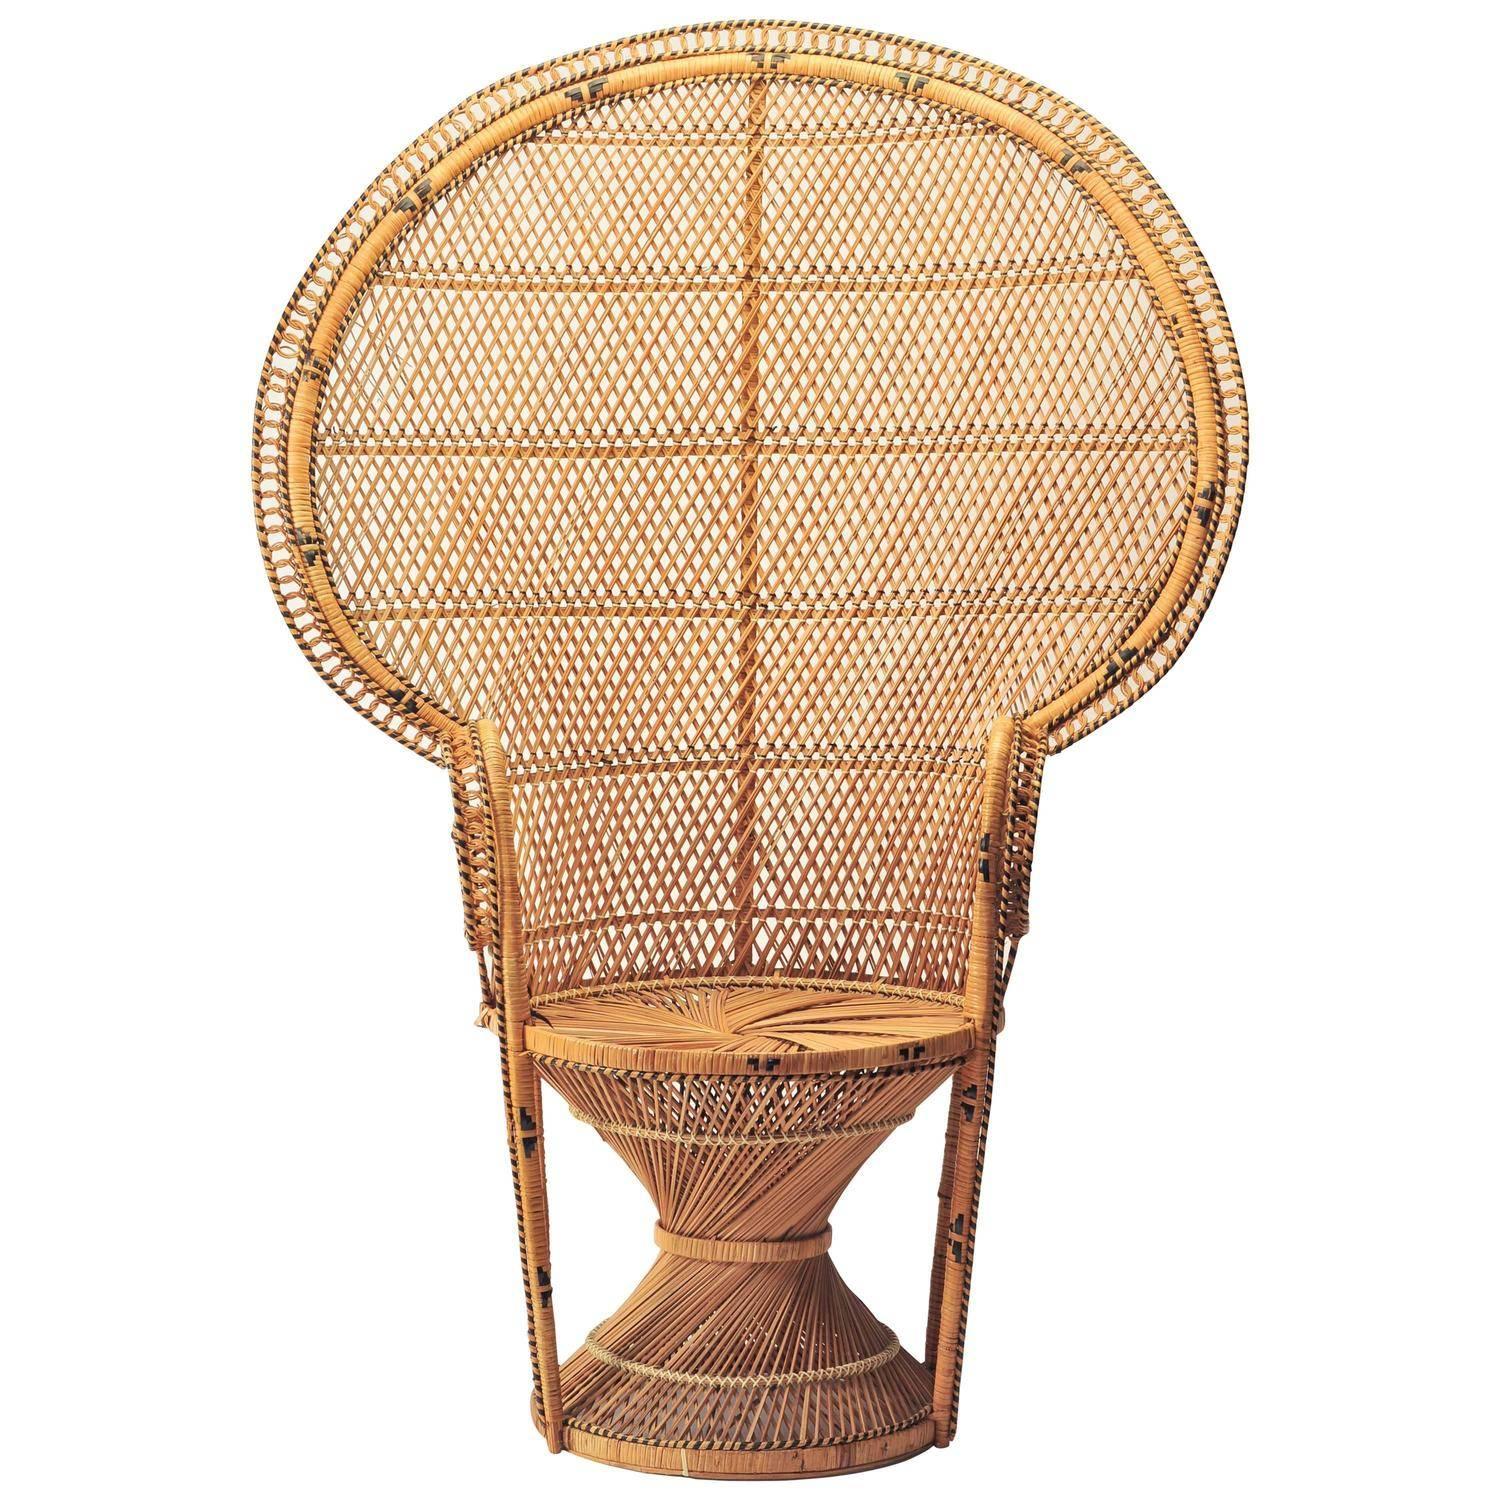 Iconic Emmanuelle Chair Midcentury, Rattan Peacock Chair